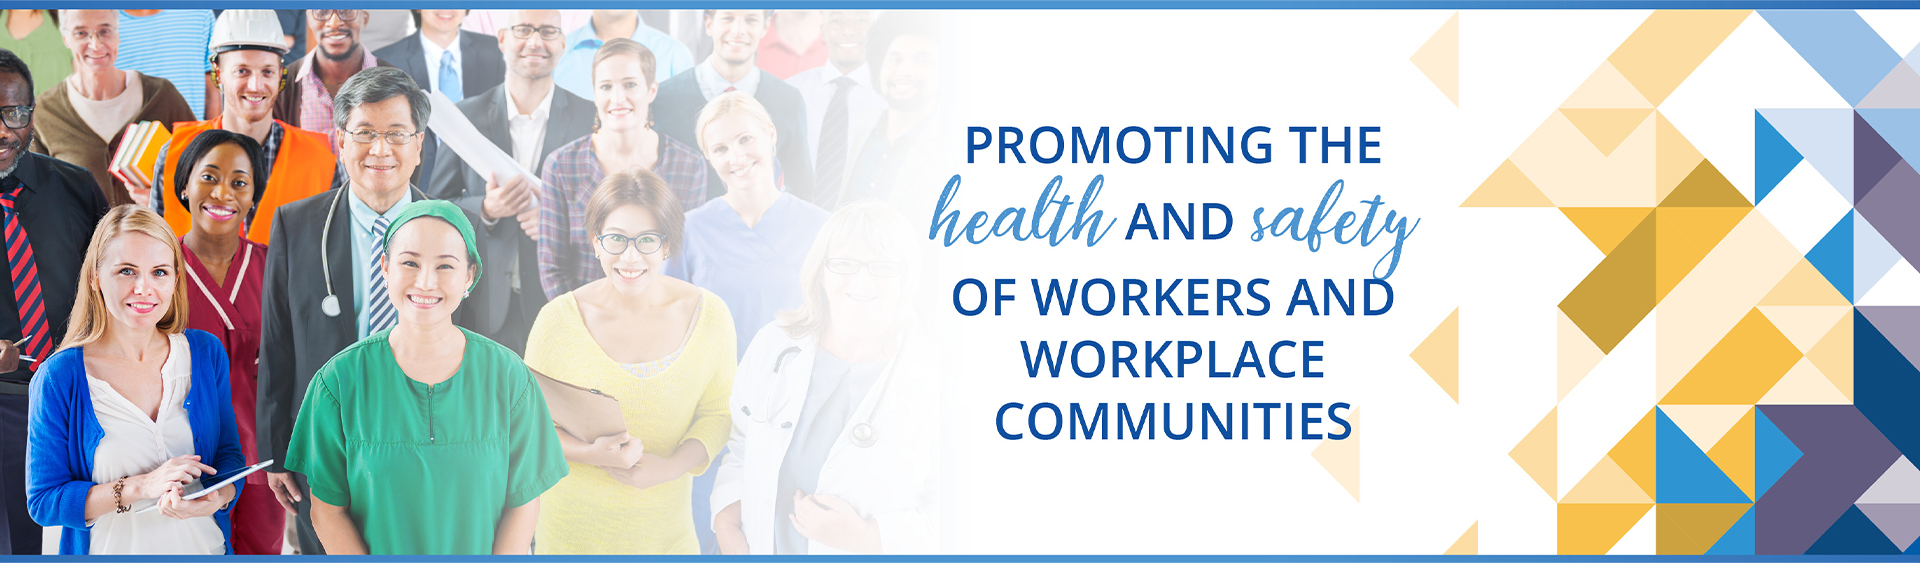 Promoting the health and safety of workers and workplace communities